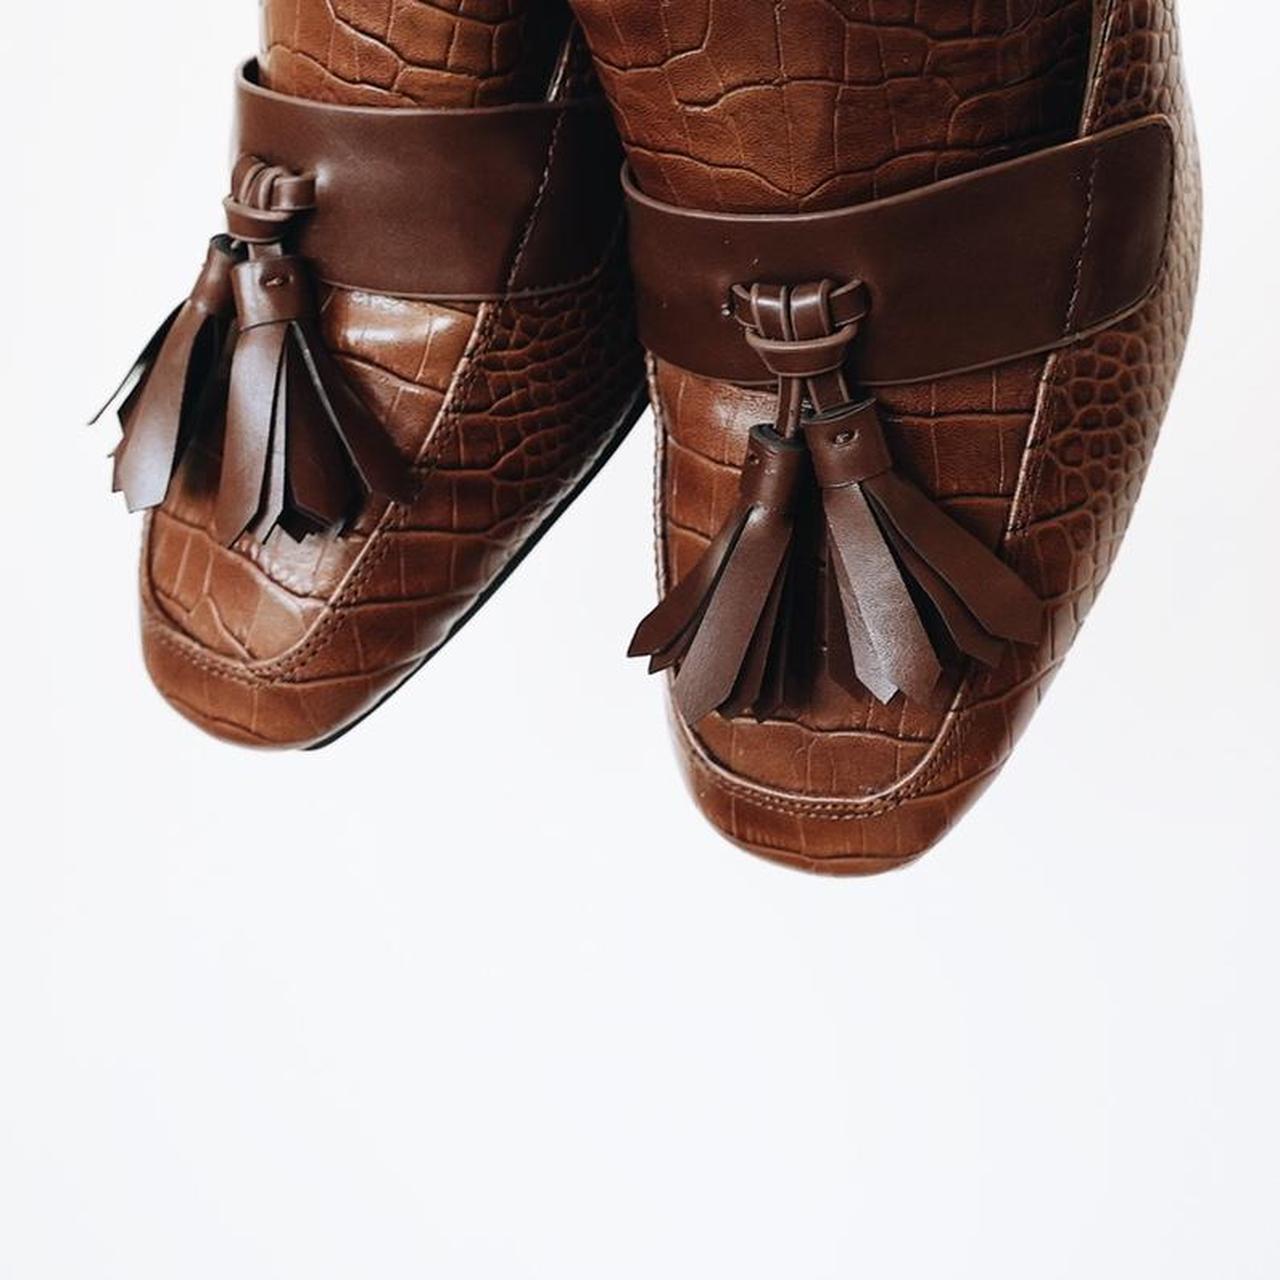 Product Image 3 - Brown Leather Mules

* If you